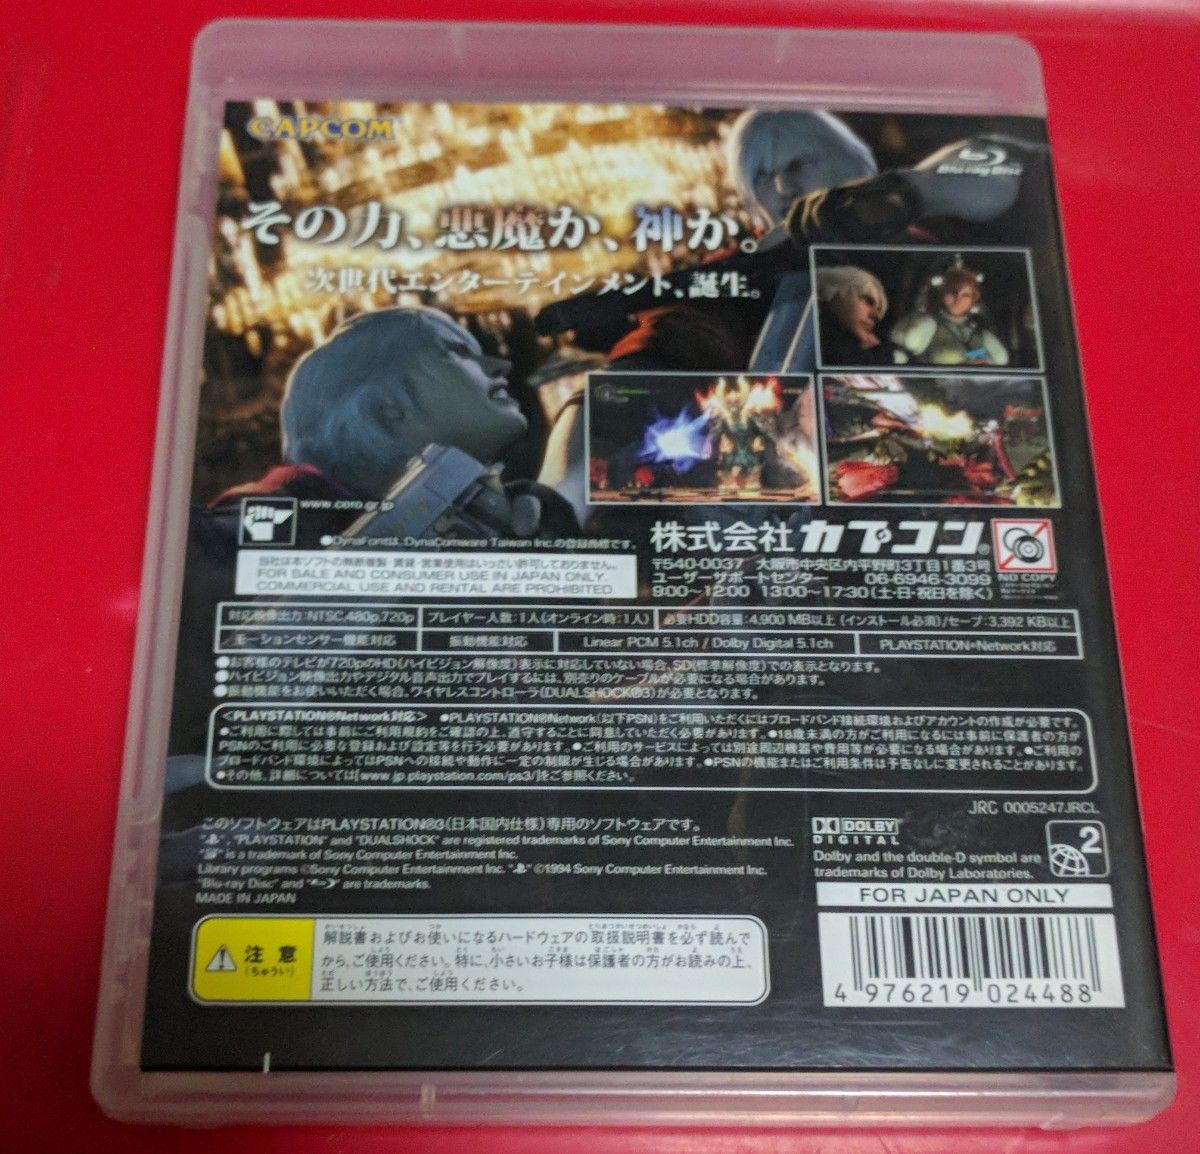 PS3「Devil May Cry 4」カプコン 